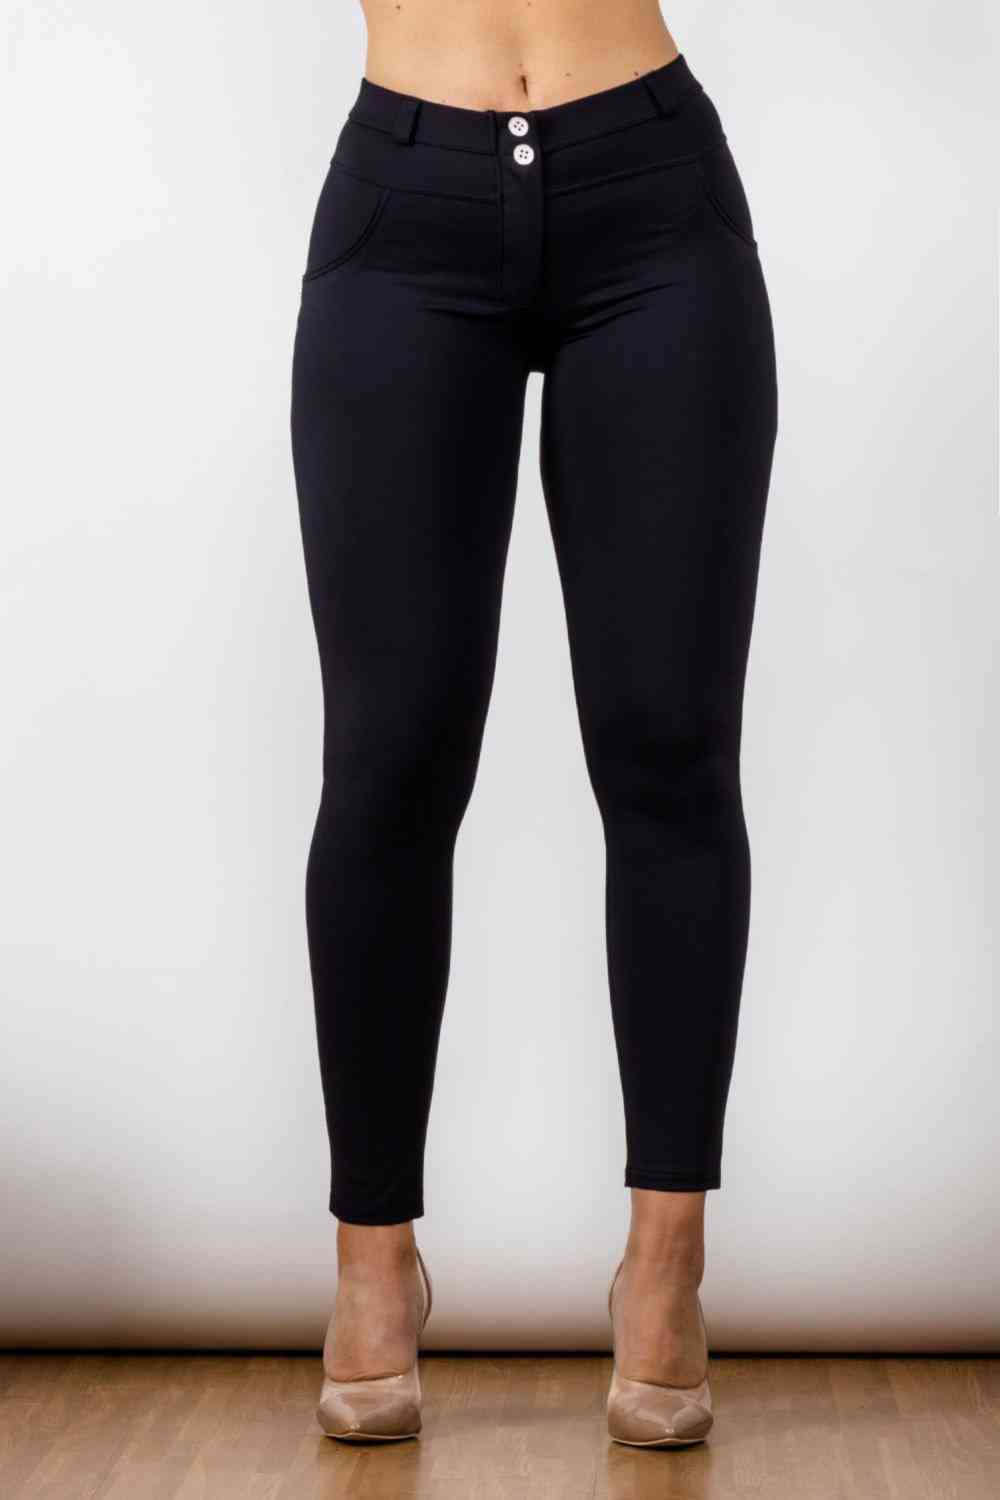 swvws Full Size Contrast Detail Buttoned Leggings